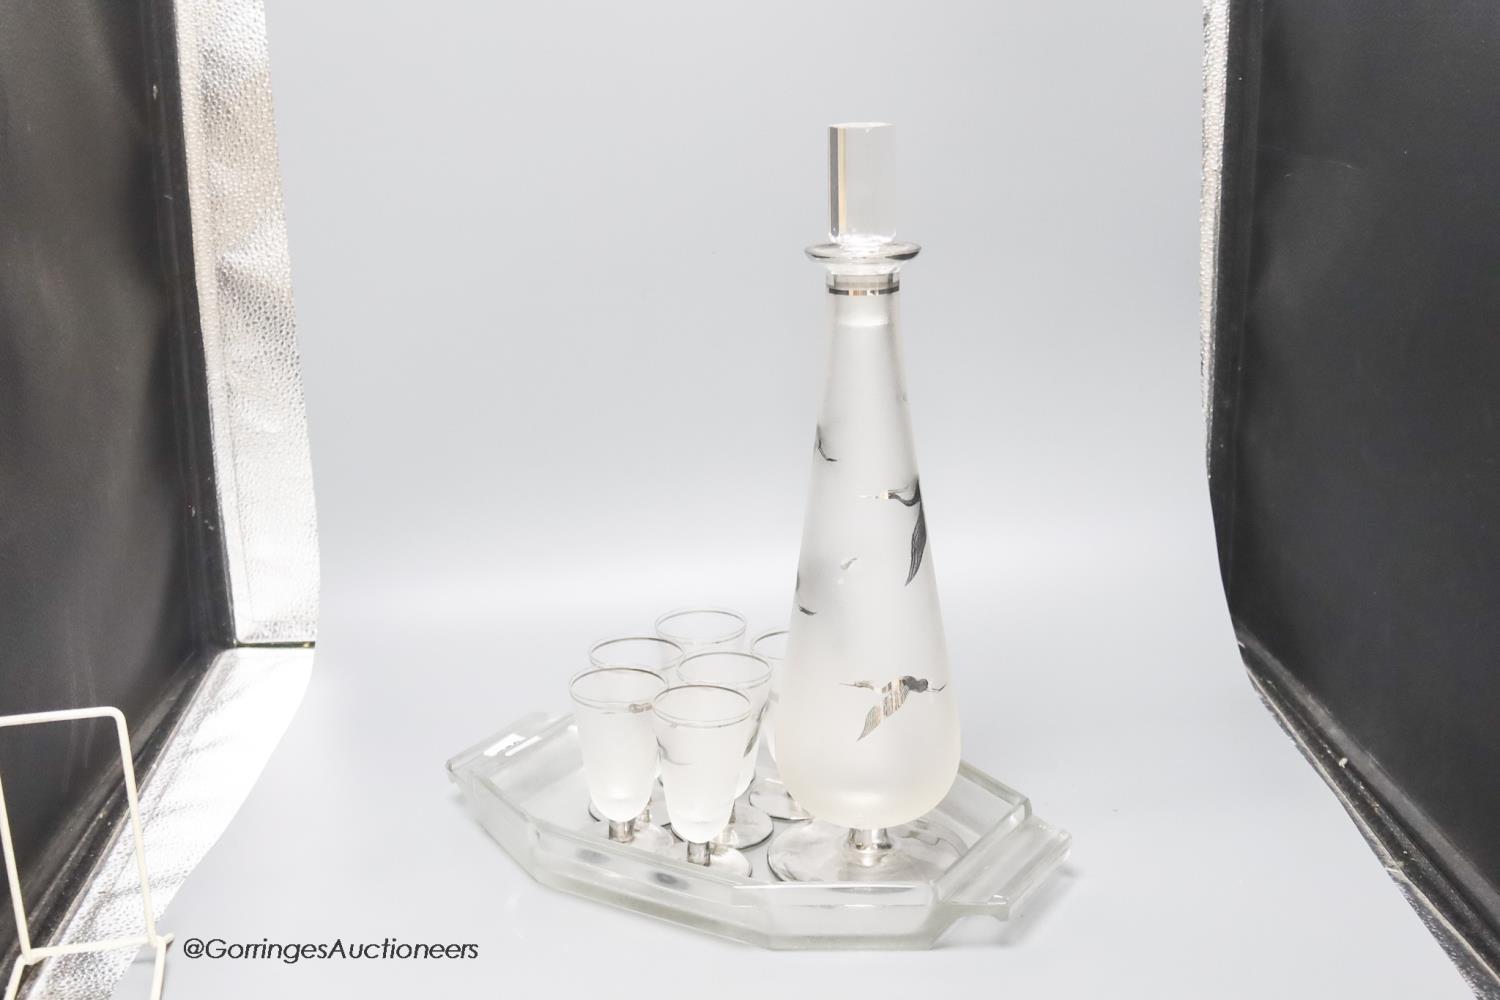 An Art Deco style glass decanter set, decanter height 40cm - Image 2 of 7